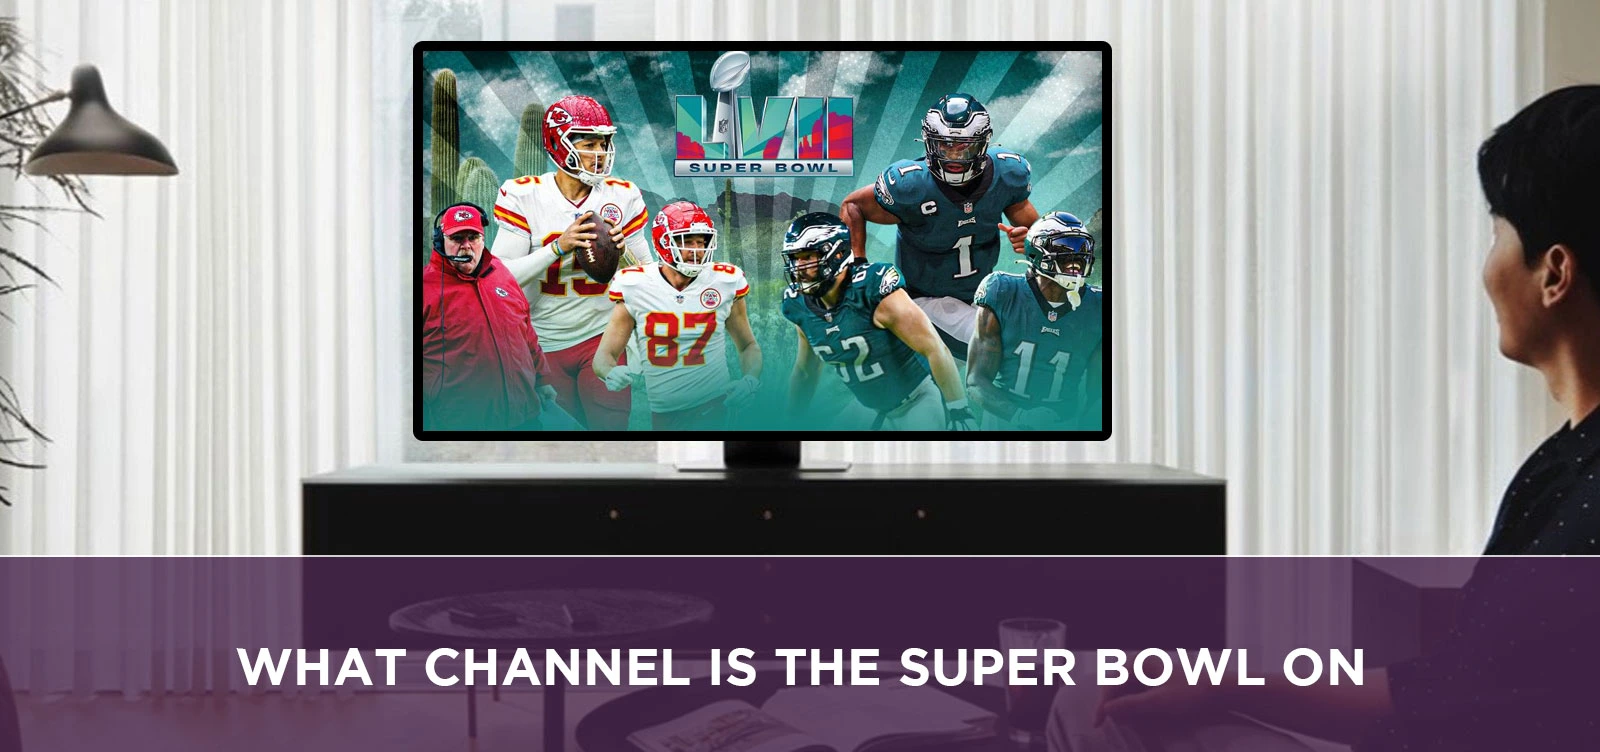 What channel is the super bowl on?